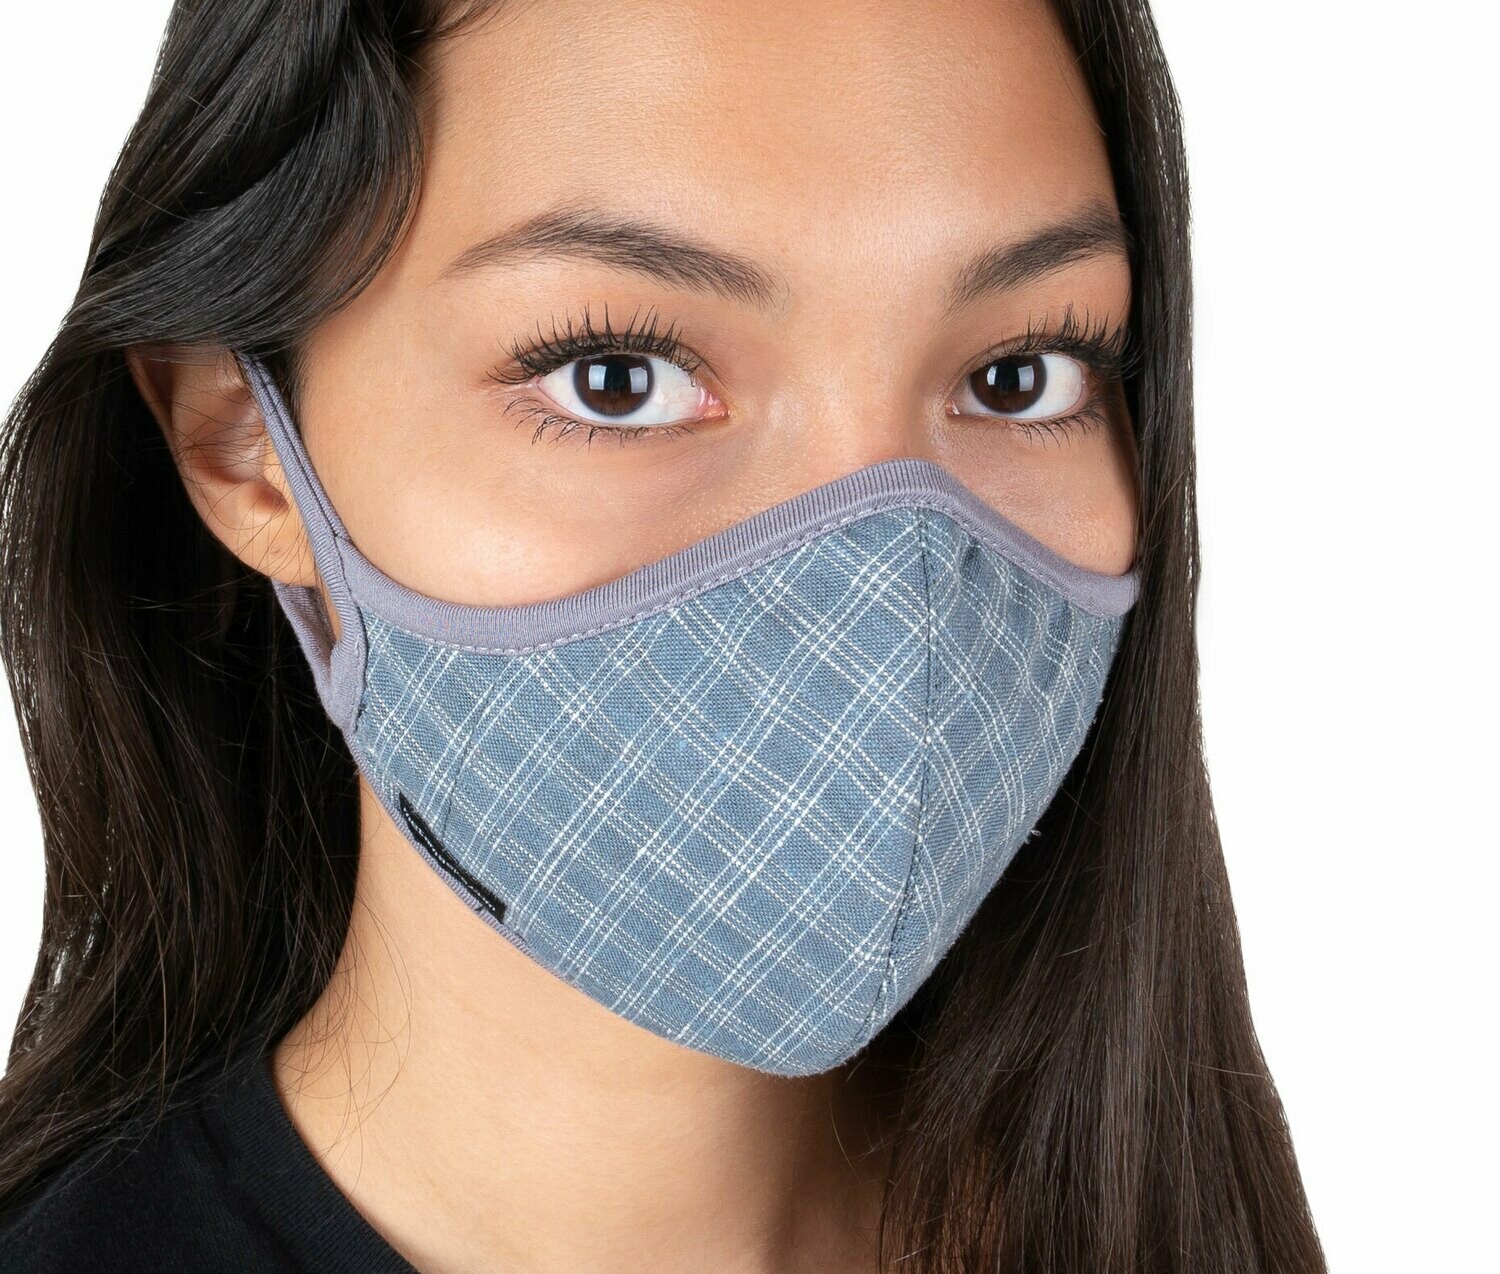 Hemp Face Mask Non-Replaceable Filter 3 colors to choose from.